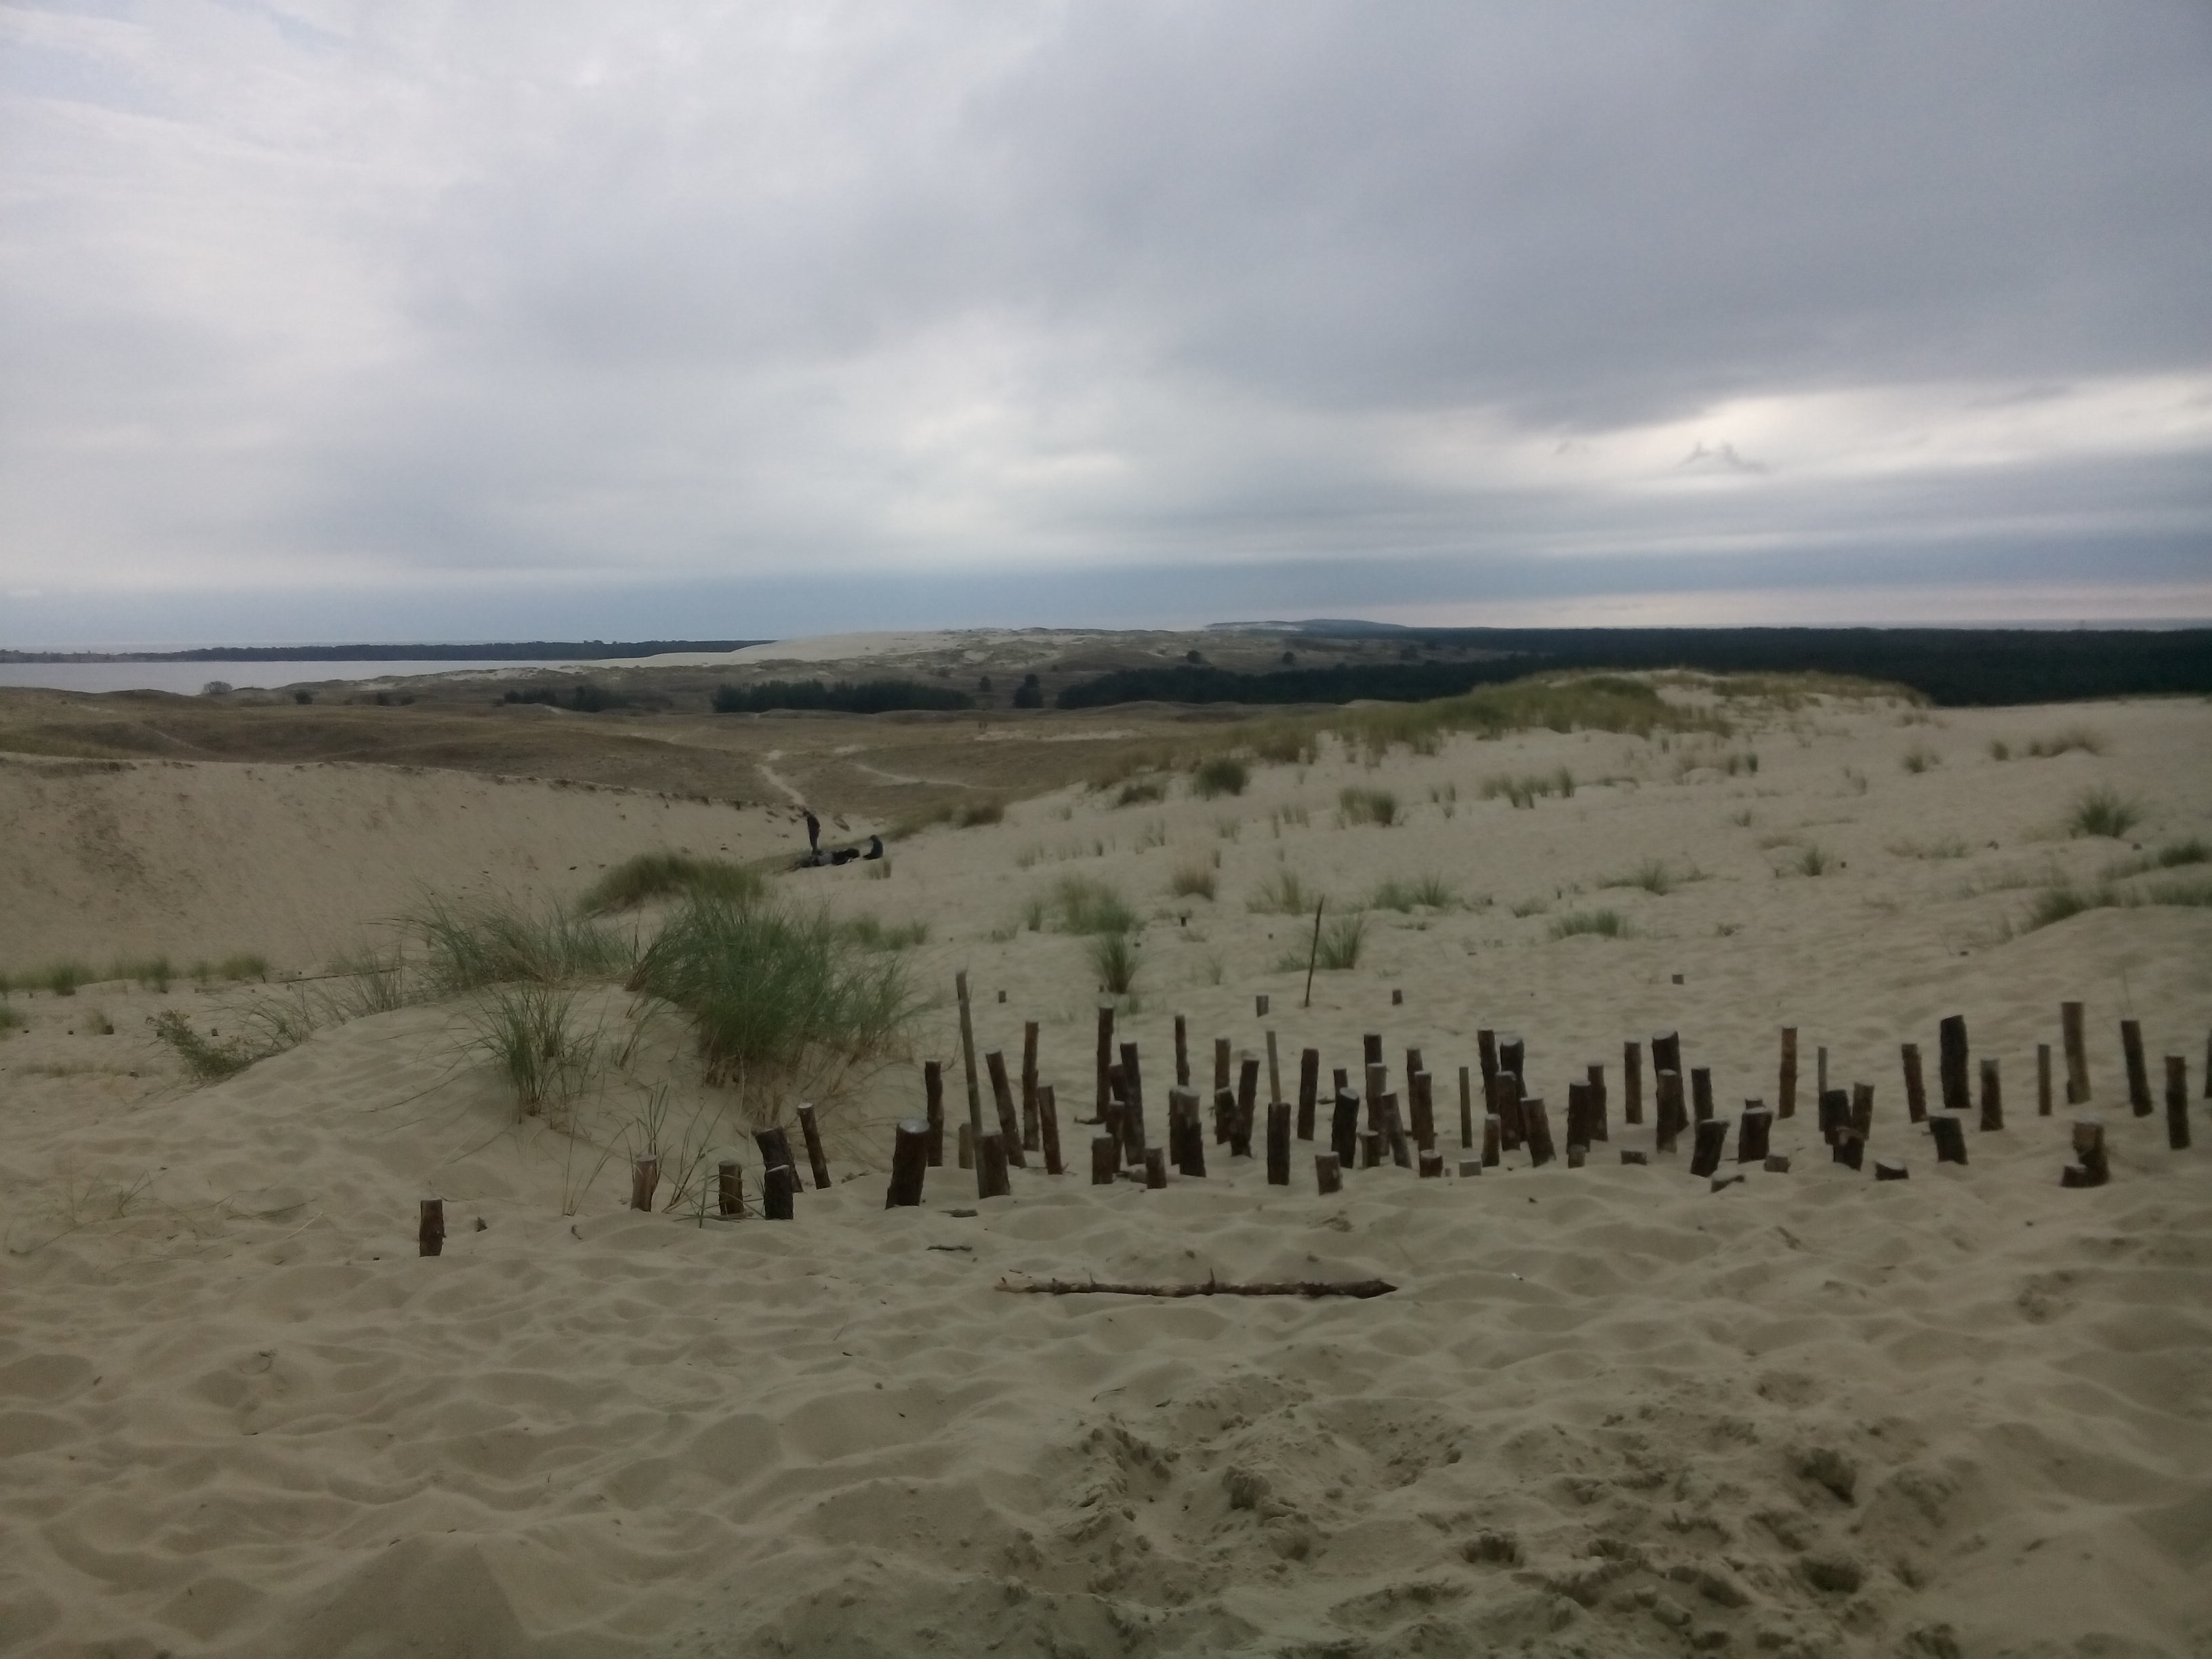 The tips of fence posts emerge from dune sand, and in the distance are forests and clouds